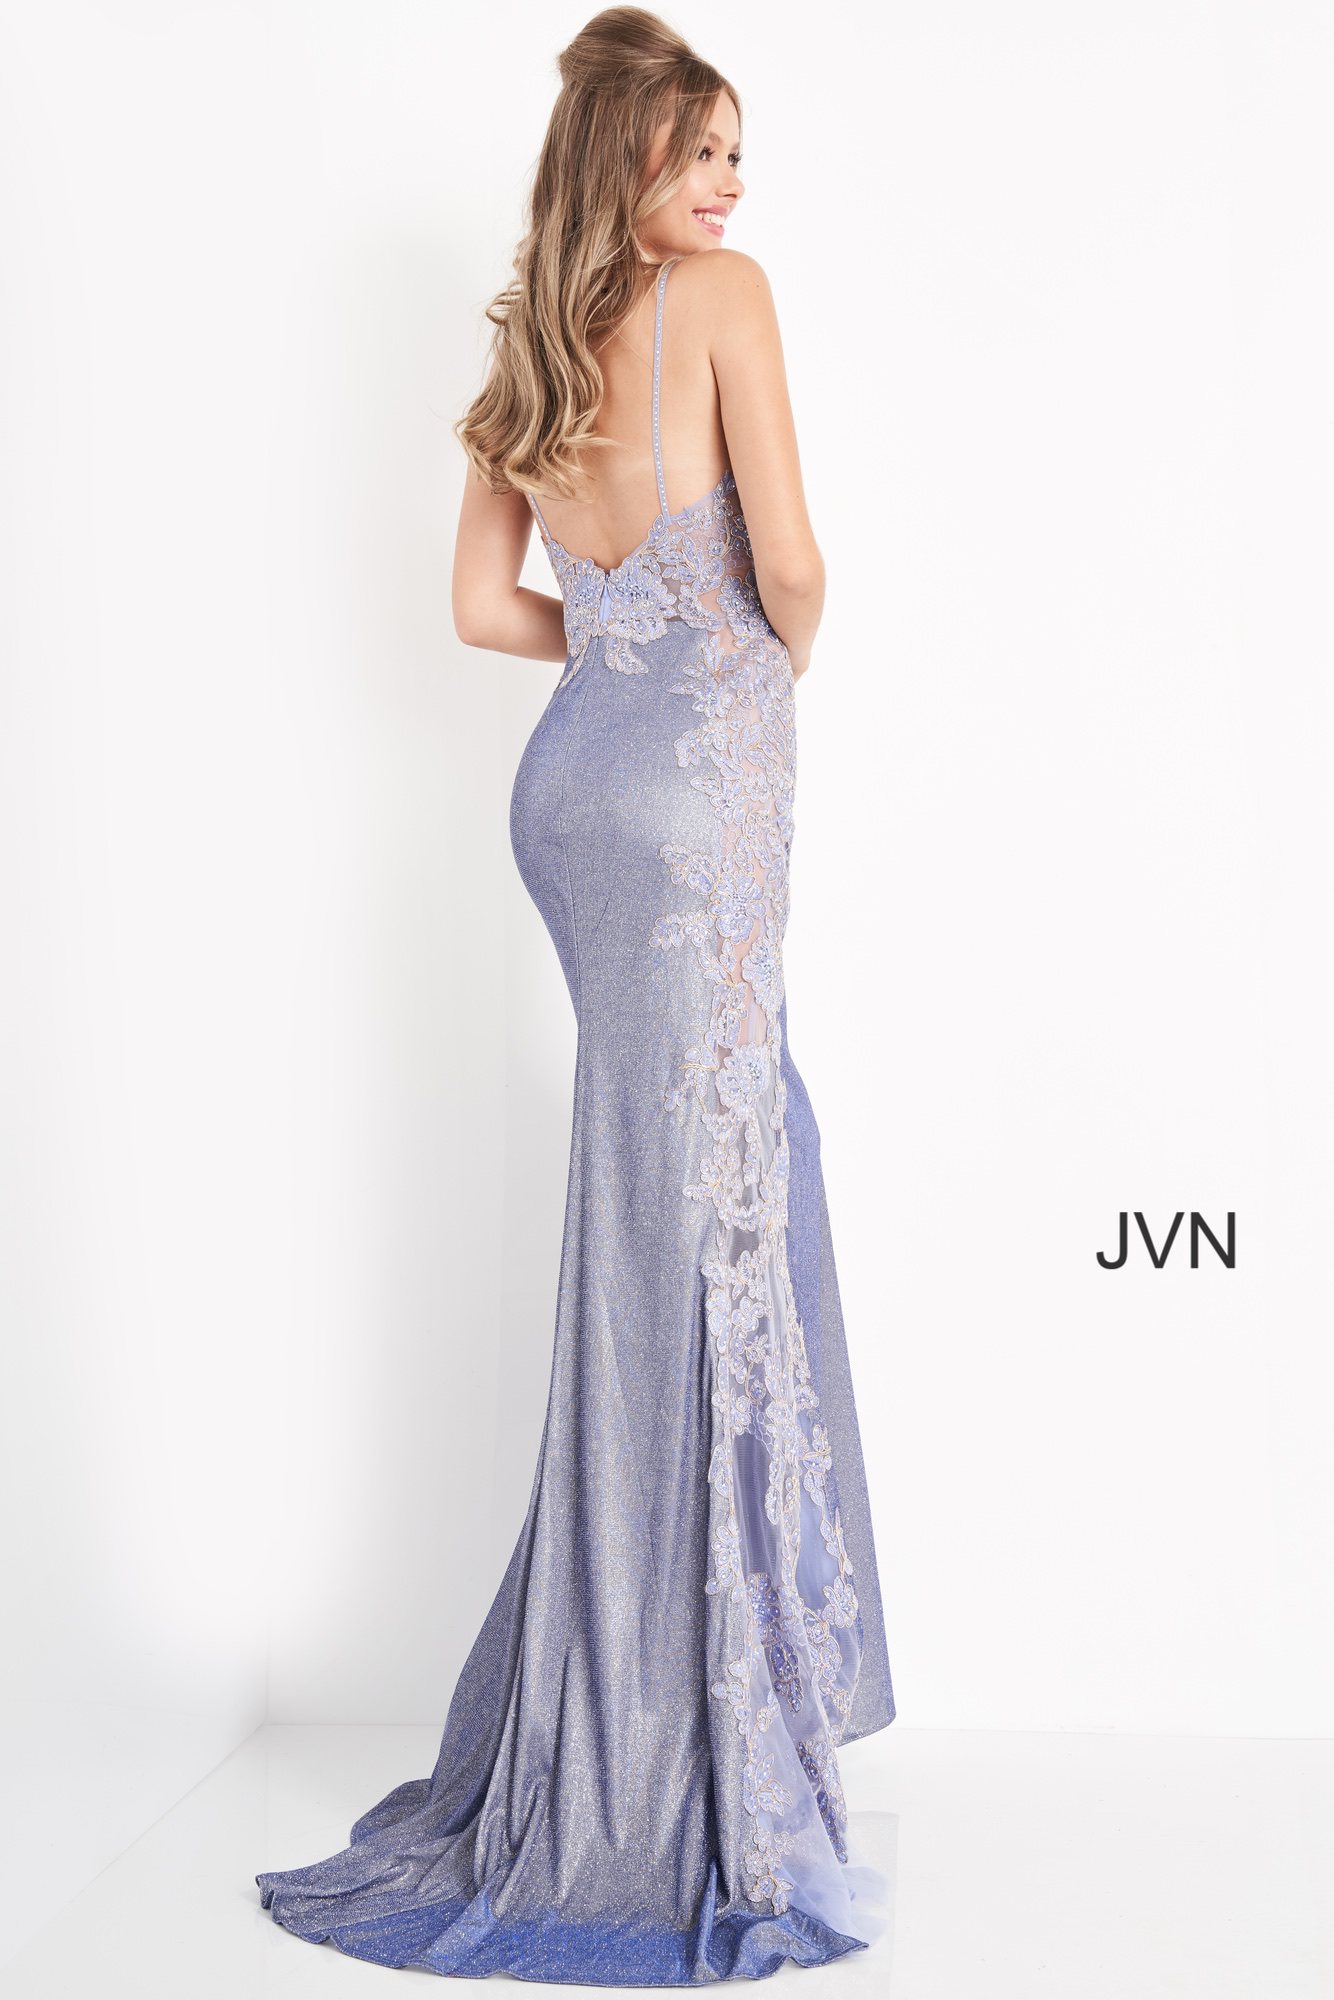 JVN2205 Dress | Nude Embroidered Floral Fitted Prom Dress